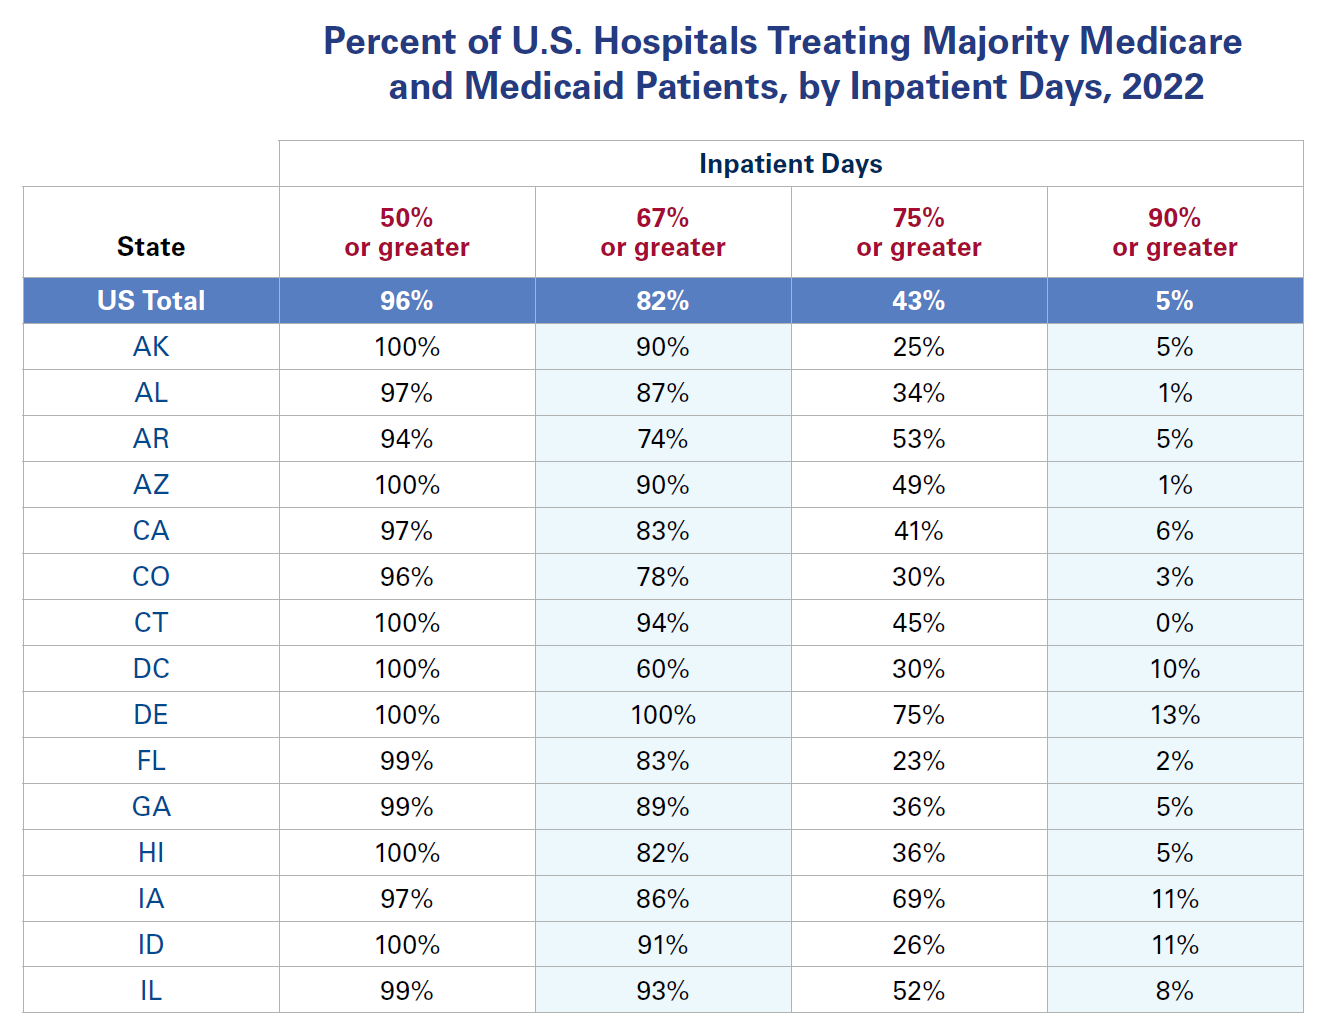 Chart: Percent of U.S. Hospitals Treating Majority Medicare and Medicaid Patients, by Inpatient Days, 2022